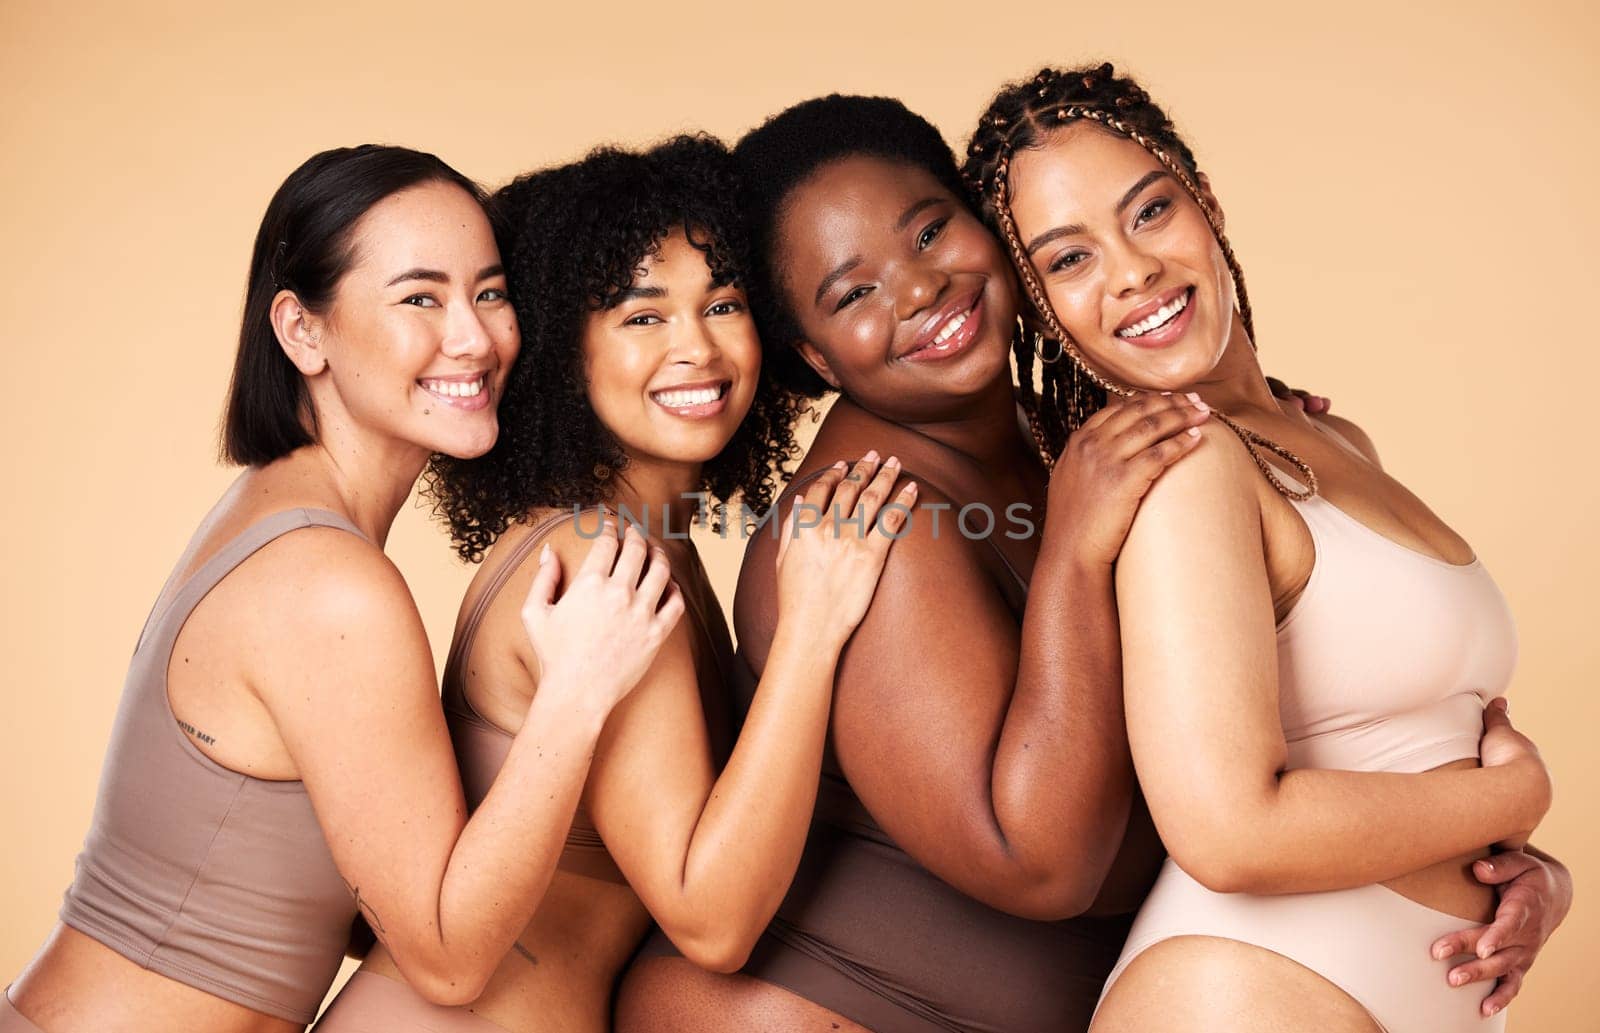 Skin care, portrait and diversity women group together for inclusion, natural beauty and power. Happy plus size model friends on beige background for support, makeup glow and underwear body self love.